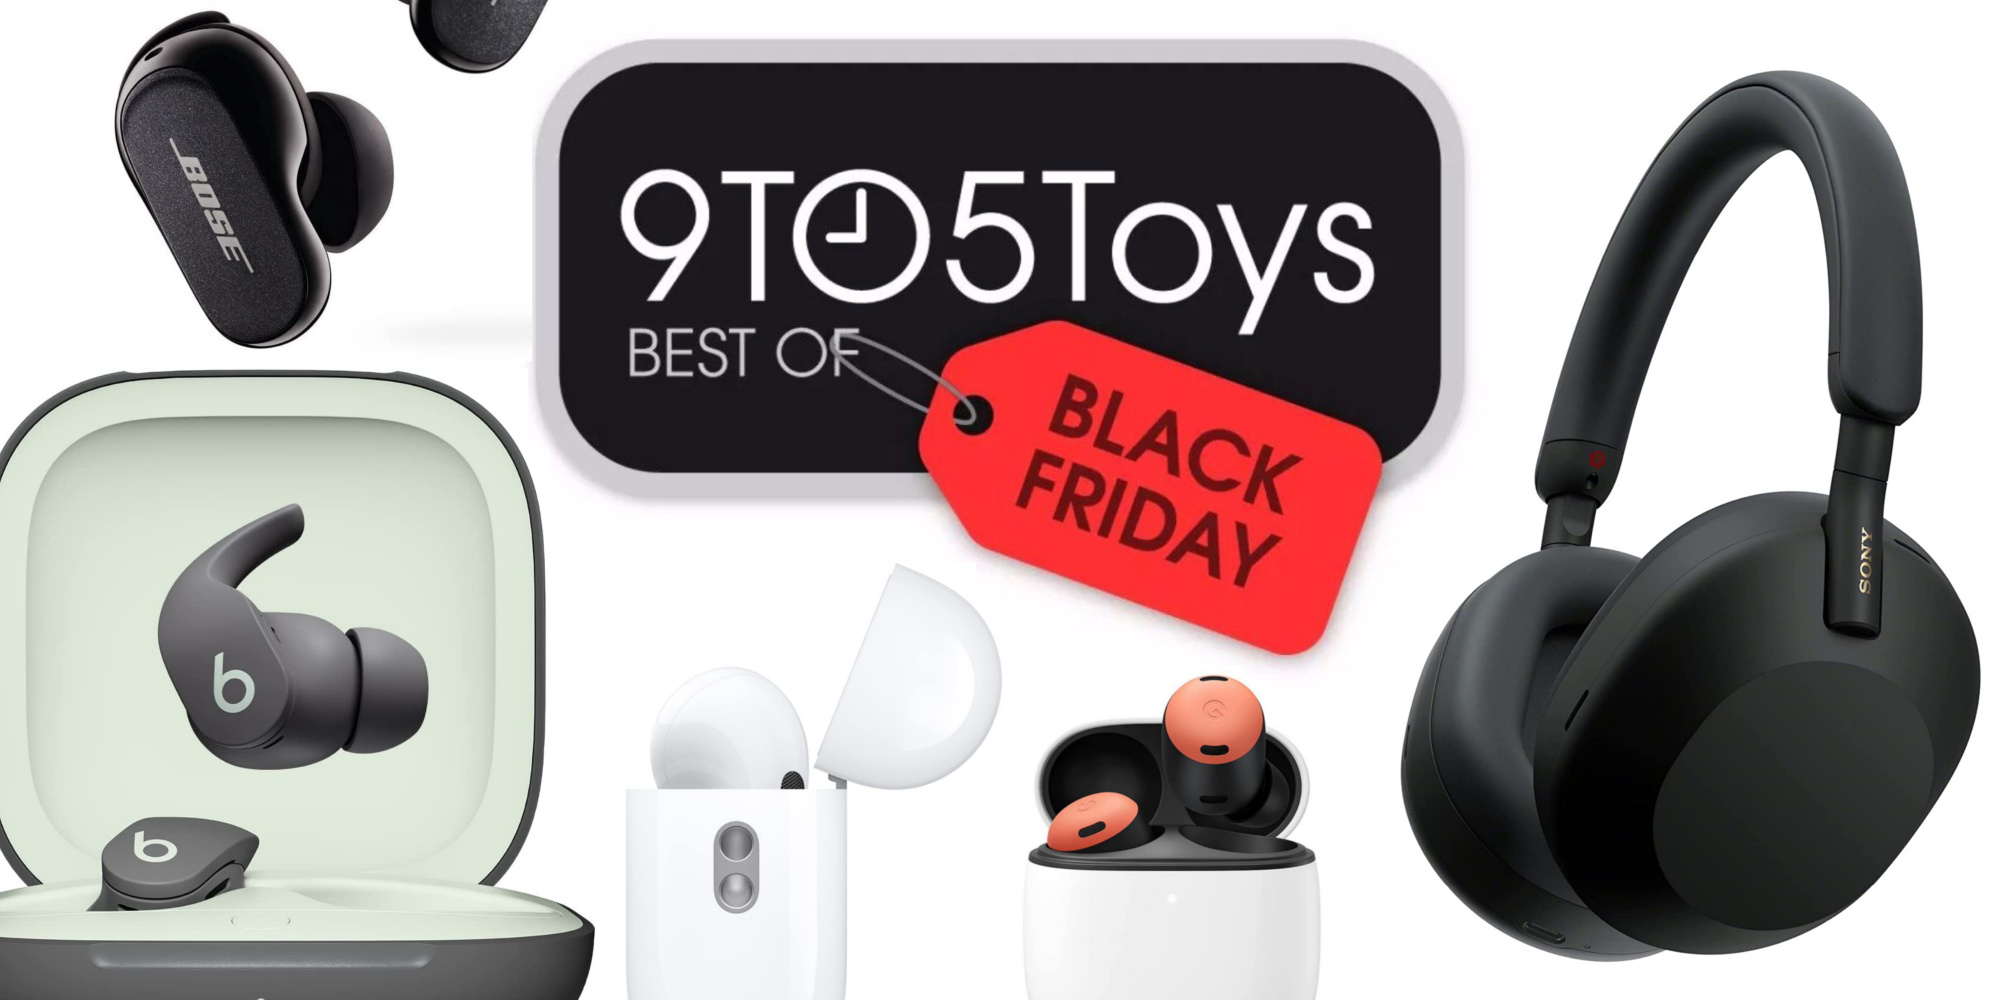 Black Friday headphone deals The best deals to watch out for